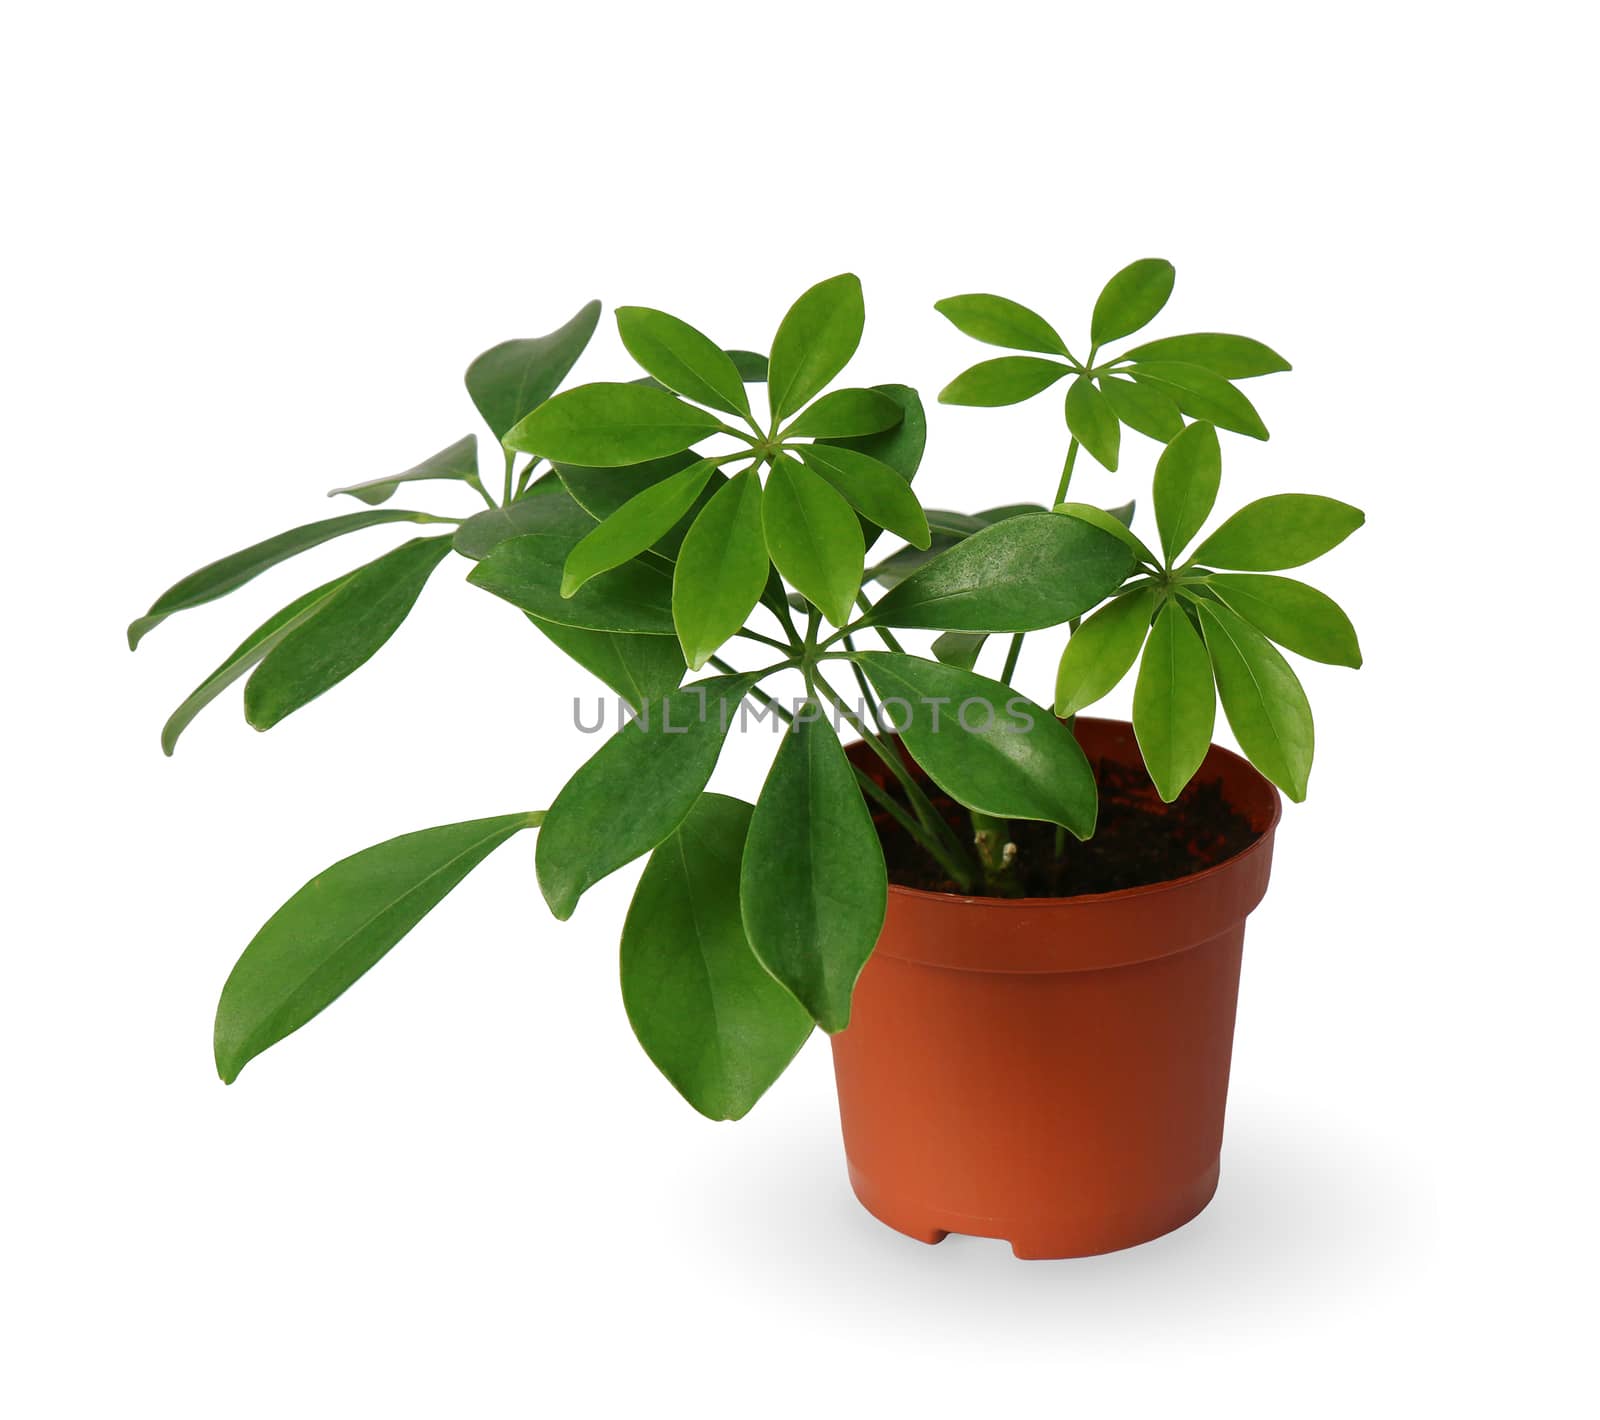 Houseplant - young Schefflera a potted plant isolated over white by kav777